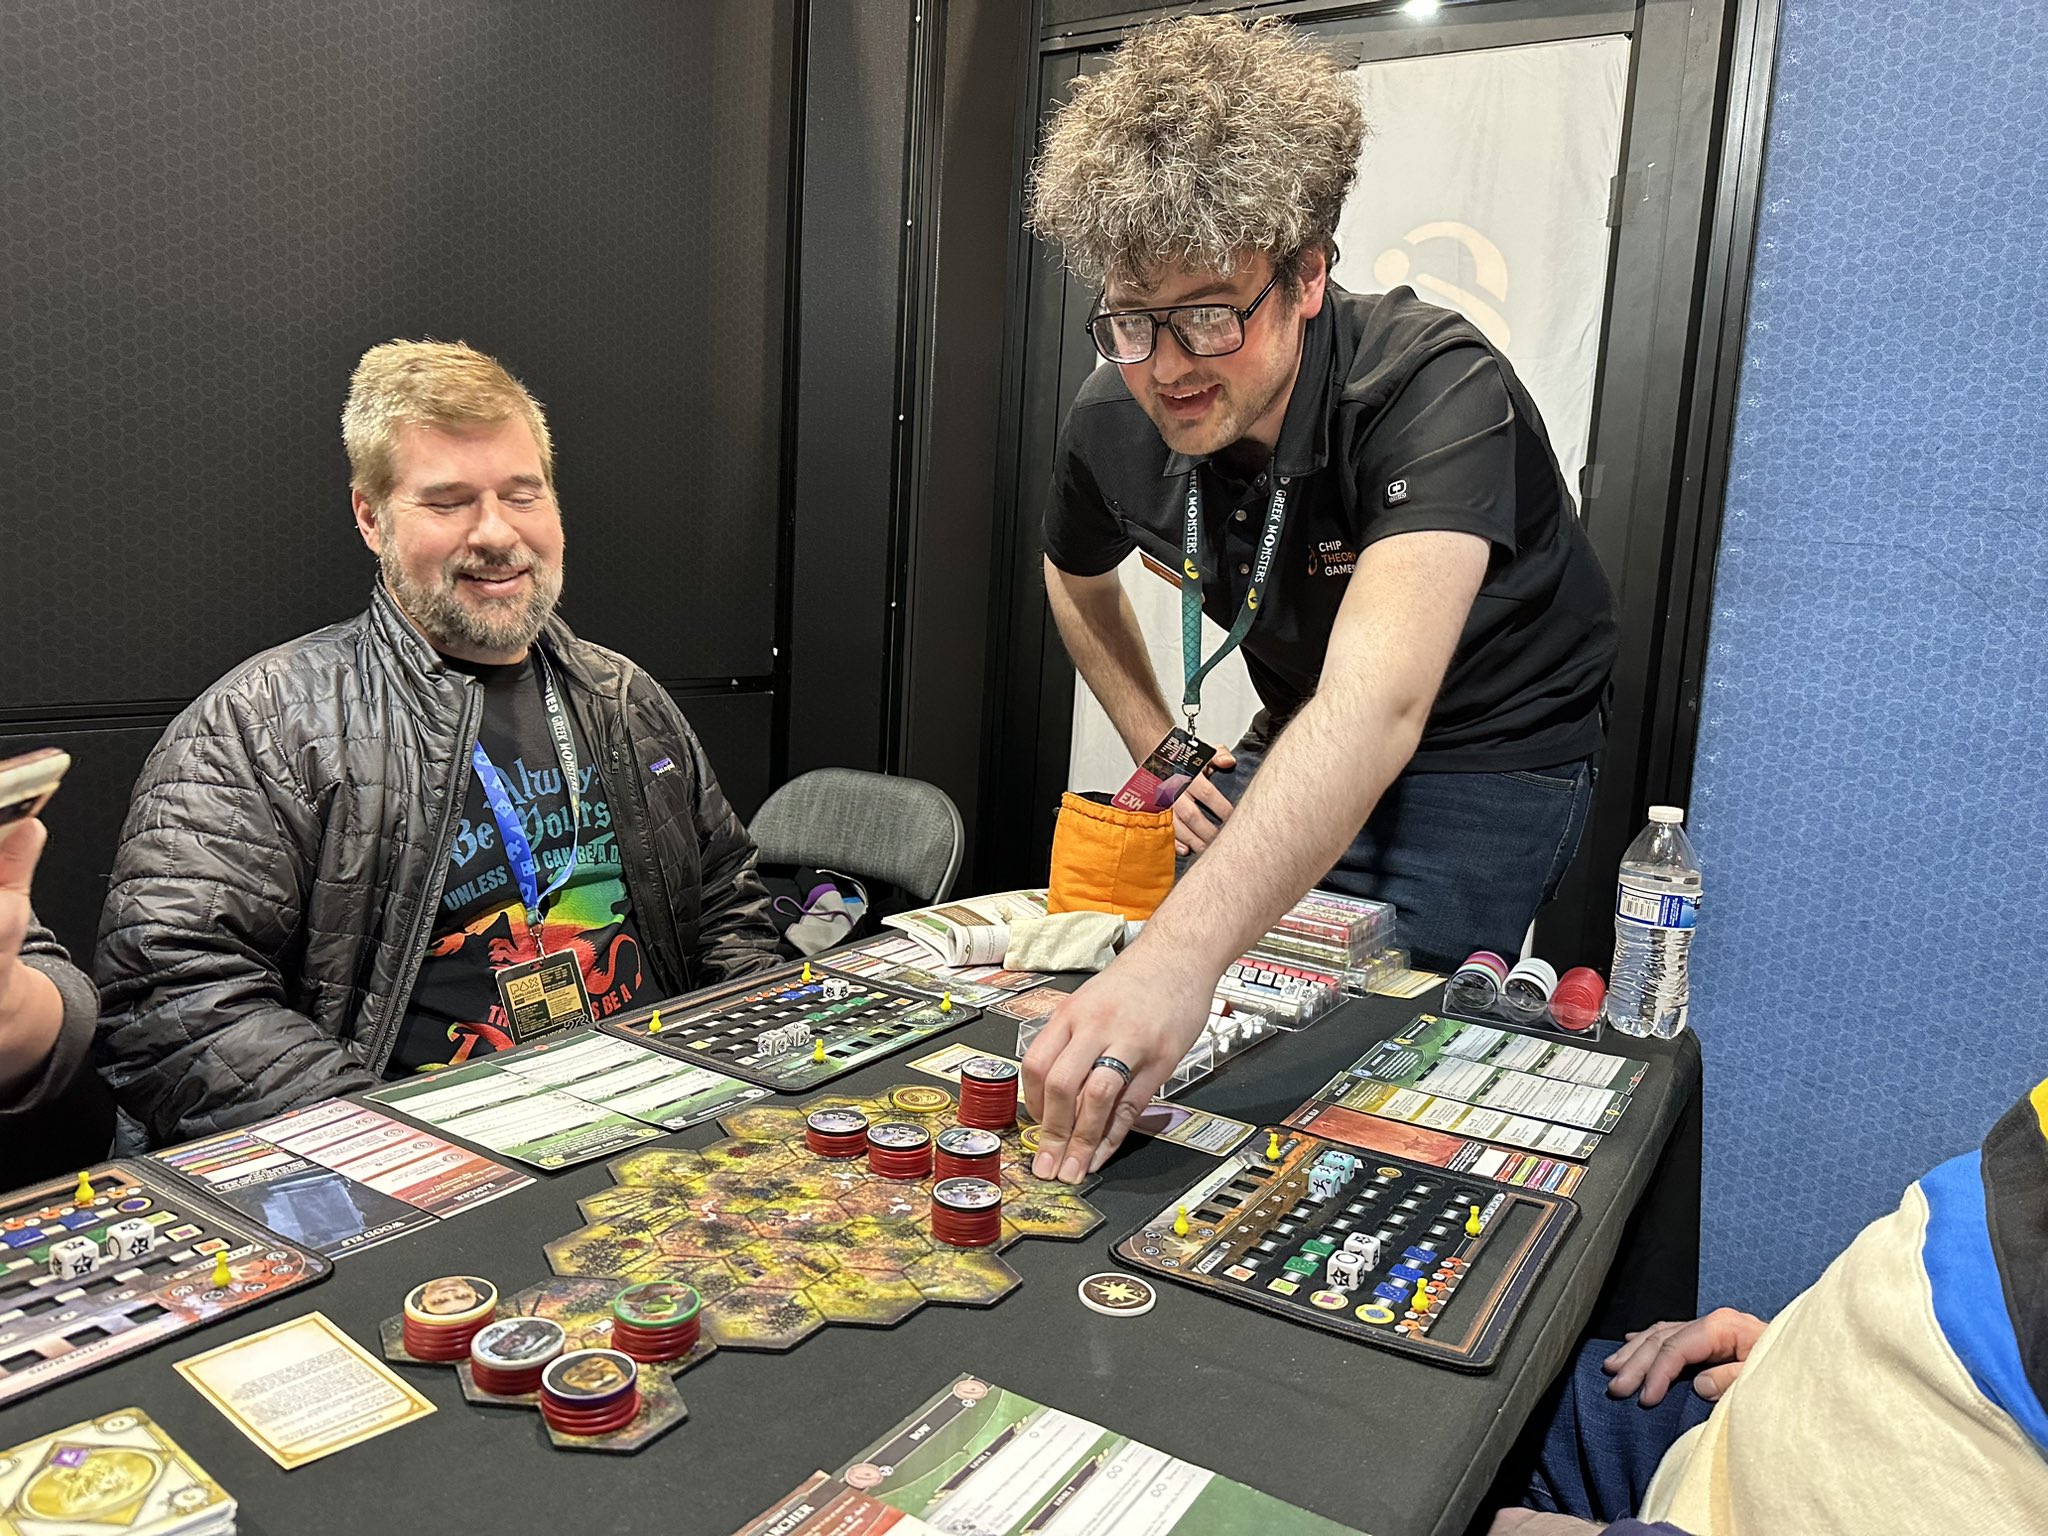 Chip Theory Games - Makers of premium tabletop experiences